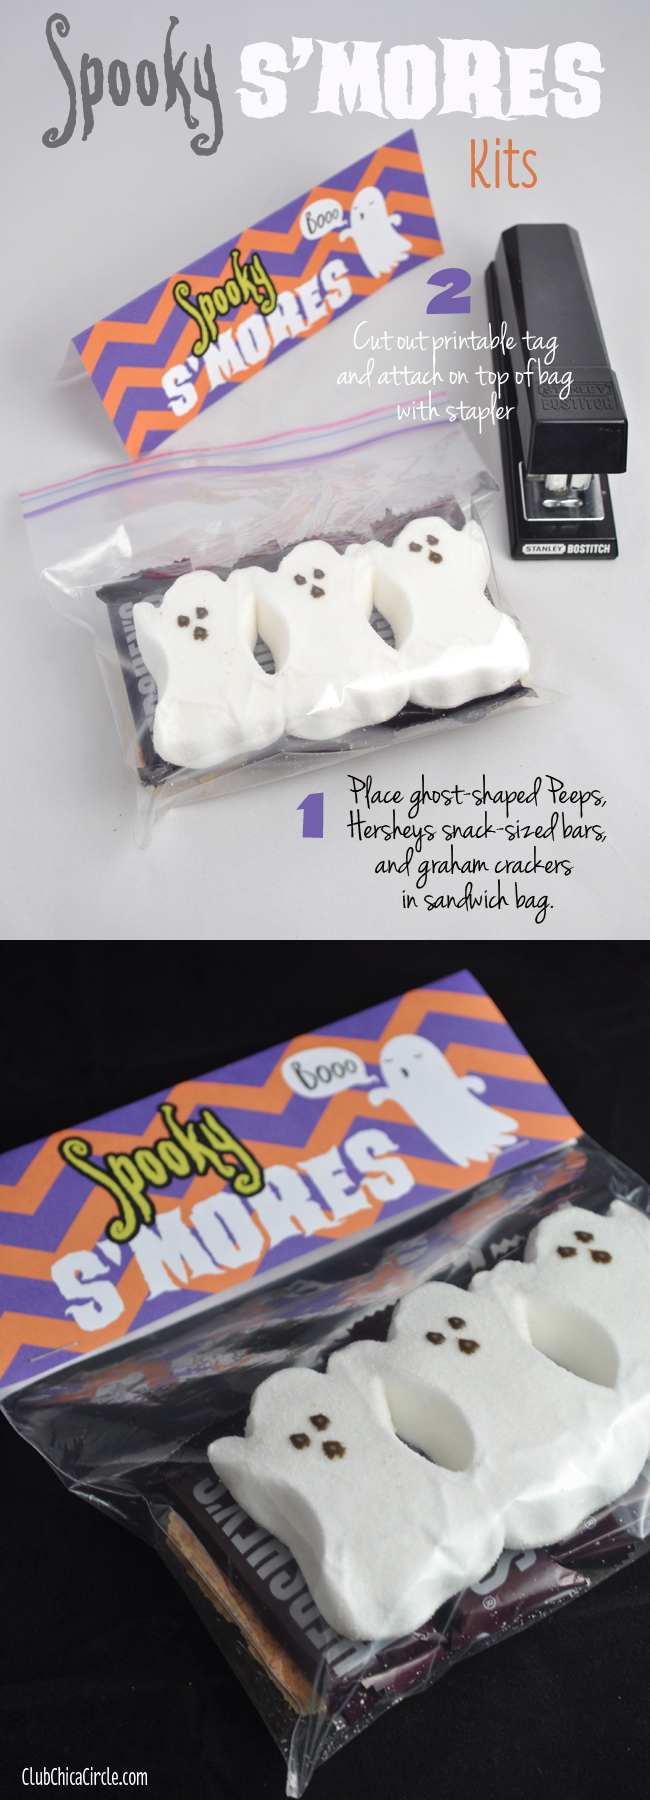 How to make Spooky S'more Kits @clubchicacircle